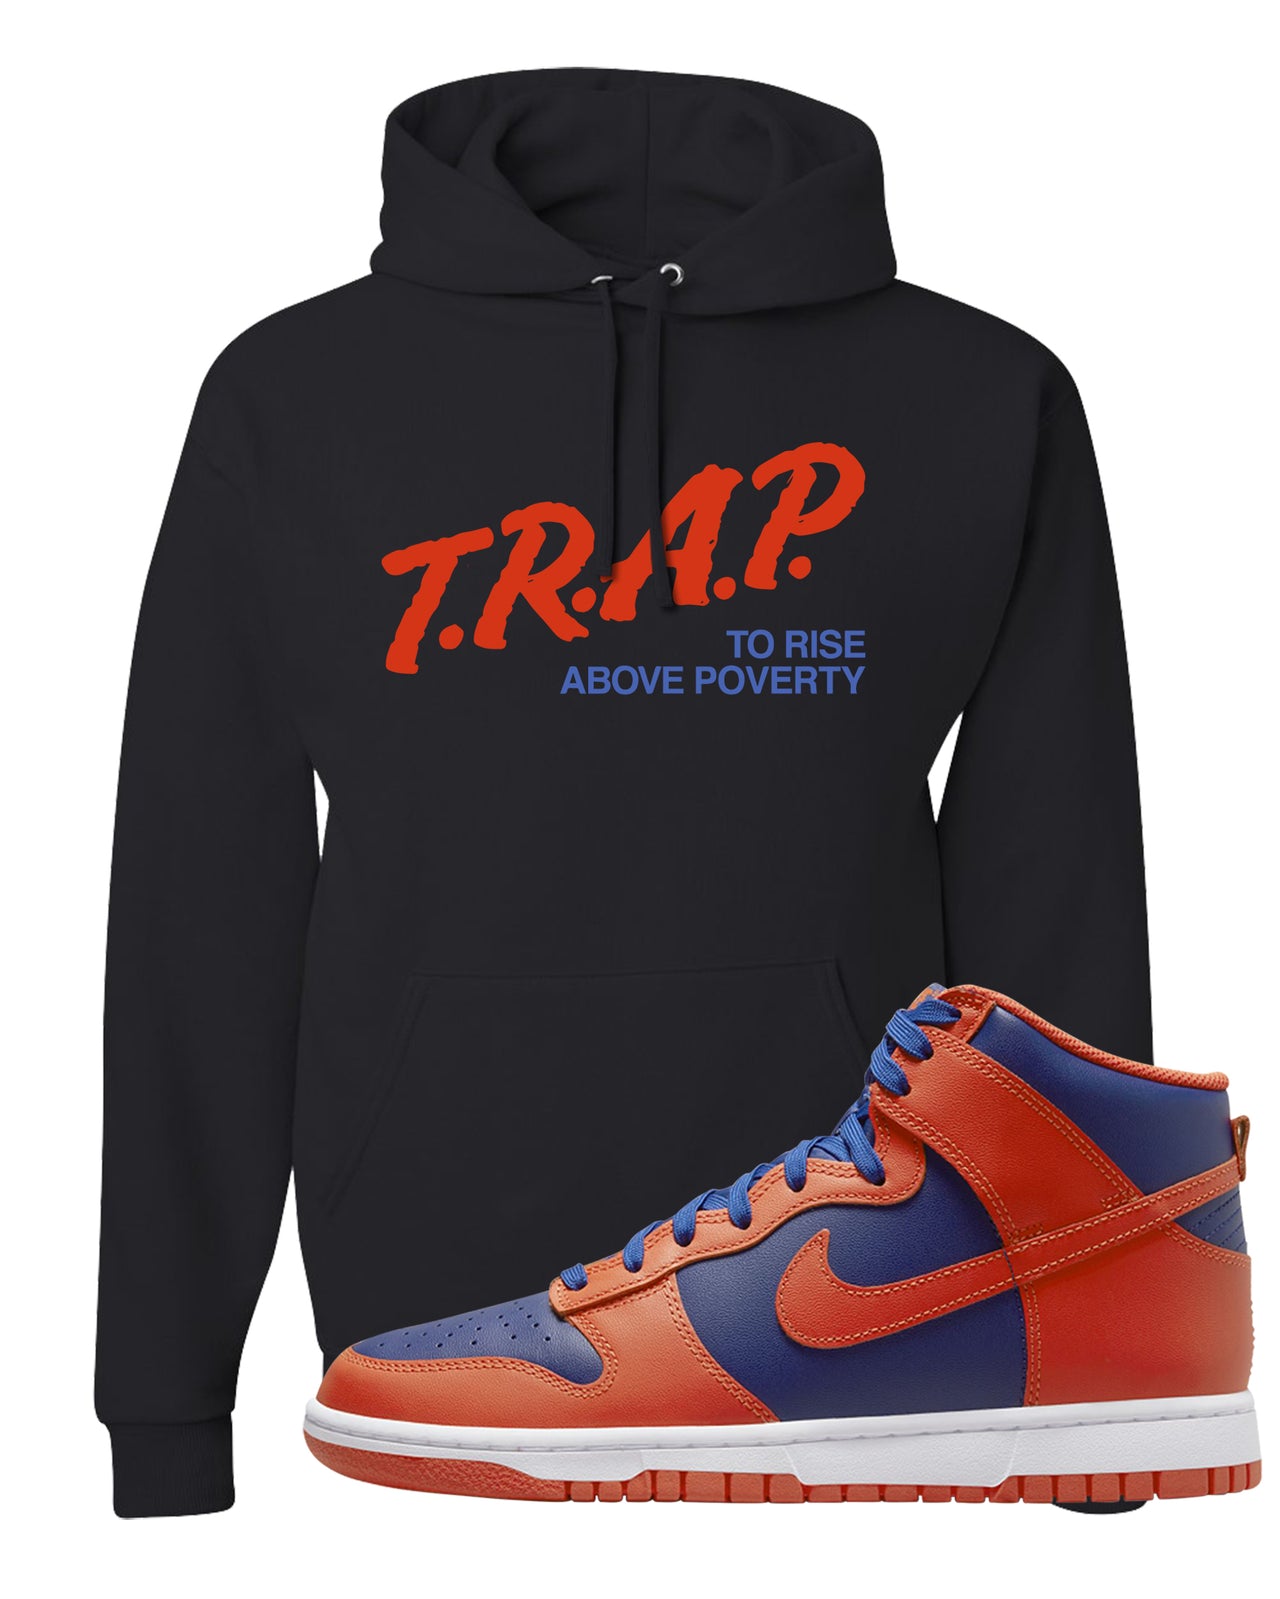 Orange Deep Royal High Dunks Hoodie | Trap To Rise Above Poverty, Black